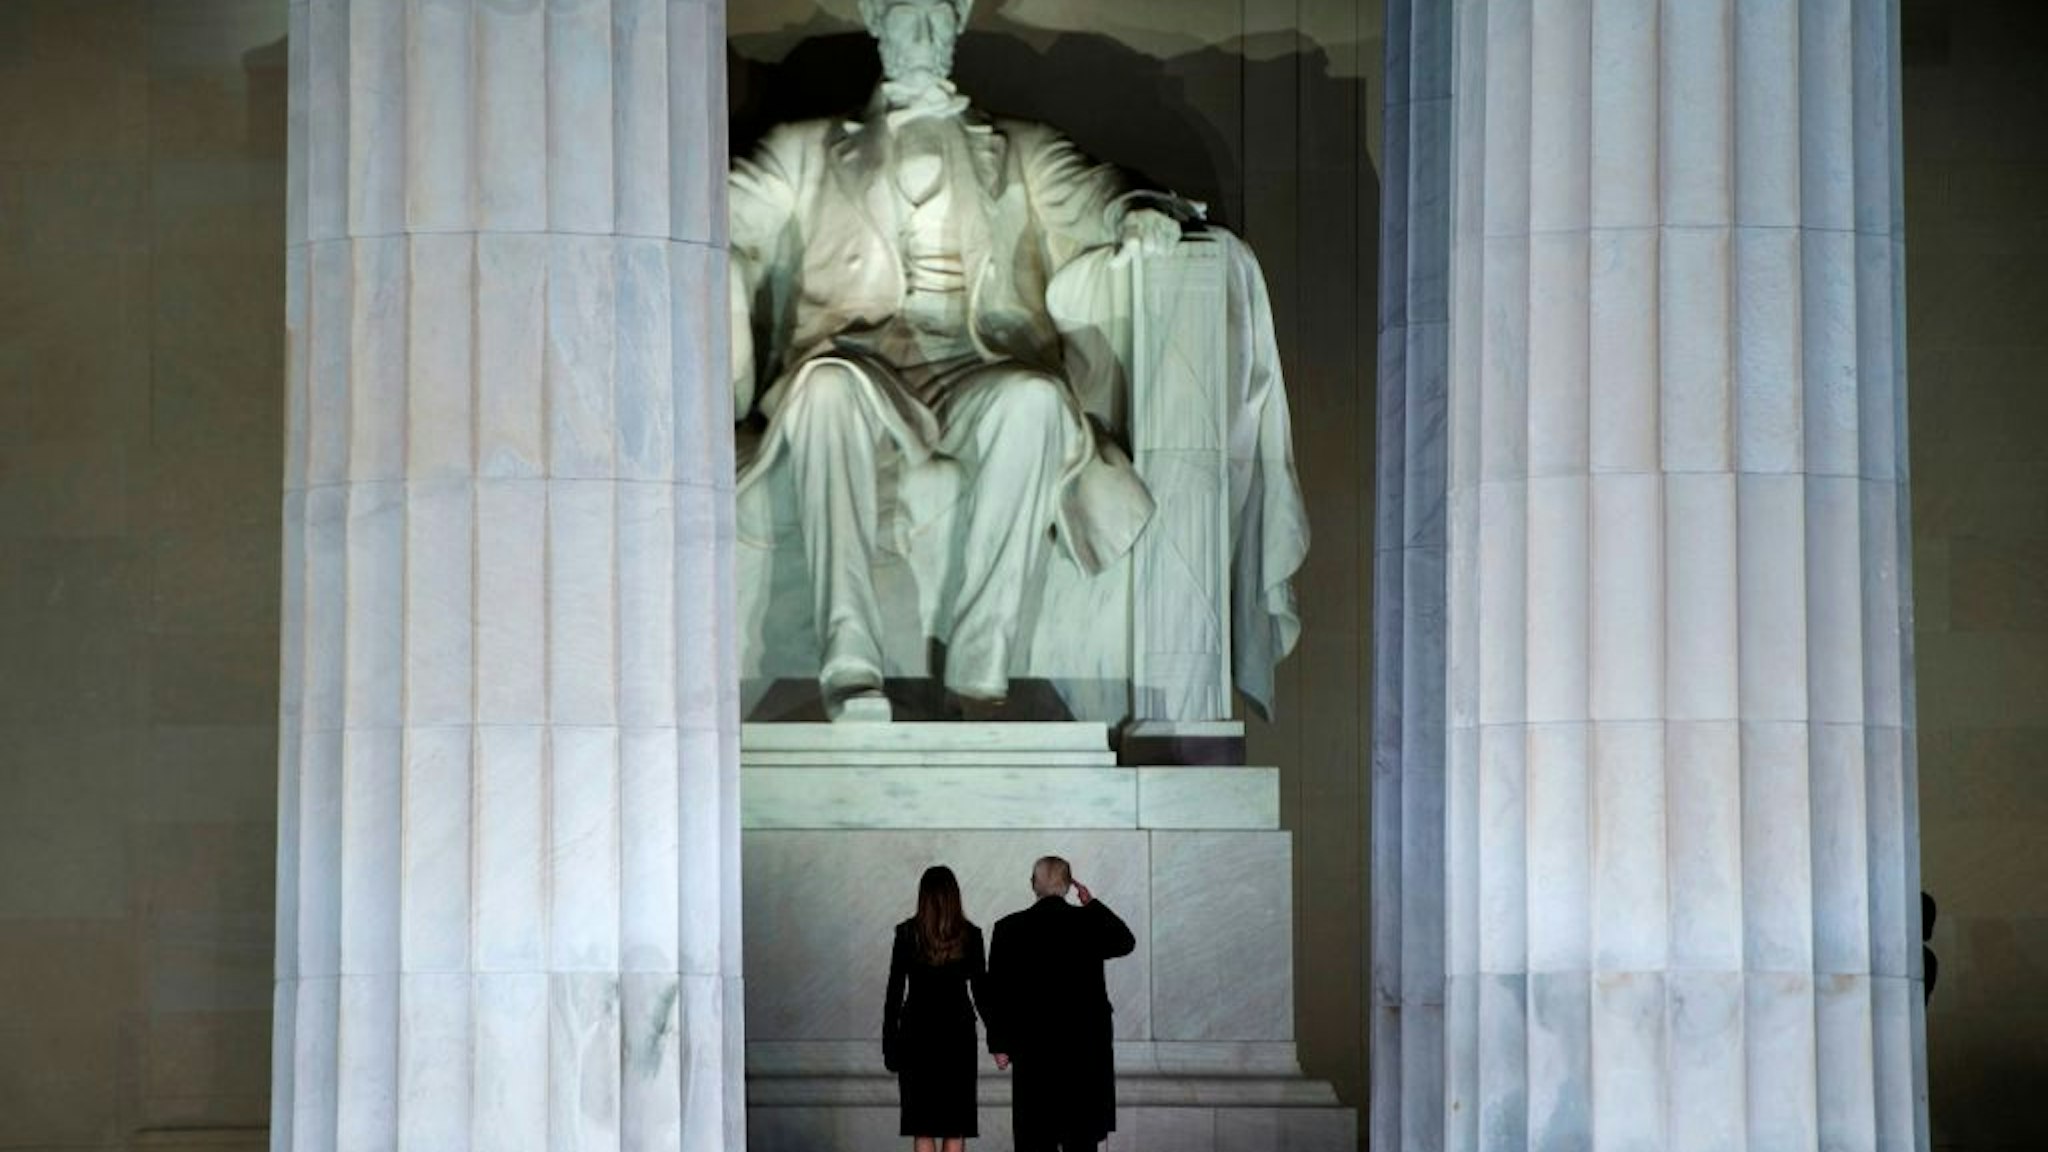 TOPSHOT - US President-elect Donald Trump and wife Melania look at the Abraham Lincoln statue as they arrive for a welcome celebration at the Lincoln Memorial in Washington, DC, on January 19, 2017. (Photo by Brendan Smialowski / AFP) (Photo by BRENDAN SMIALOWSKI/AFP via Getty Images)